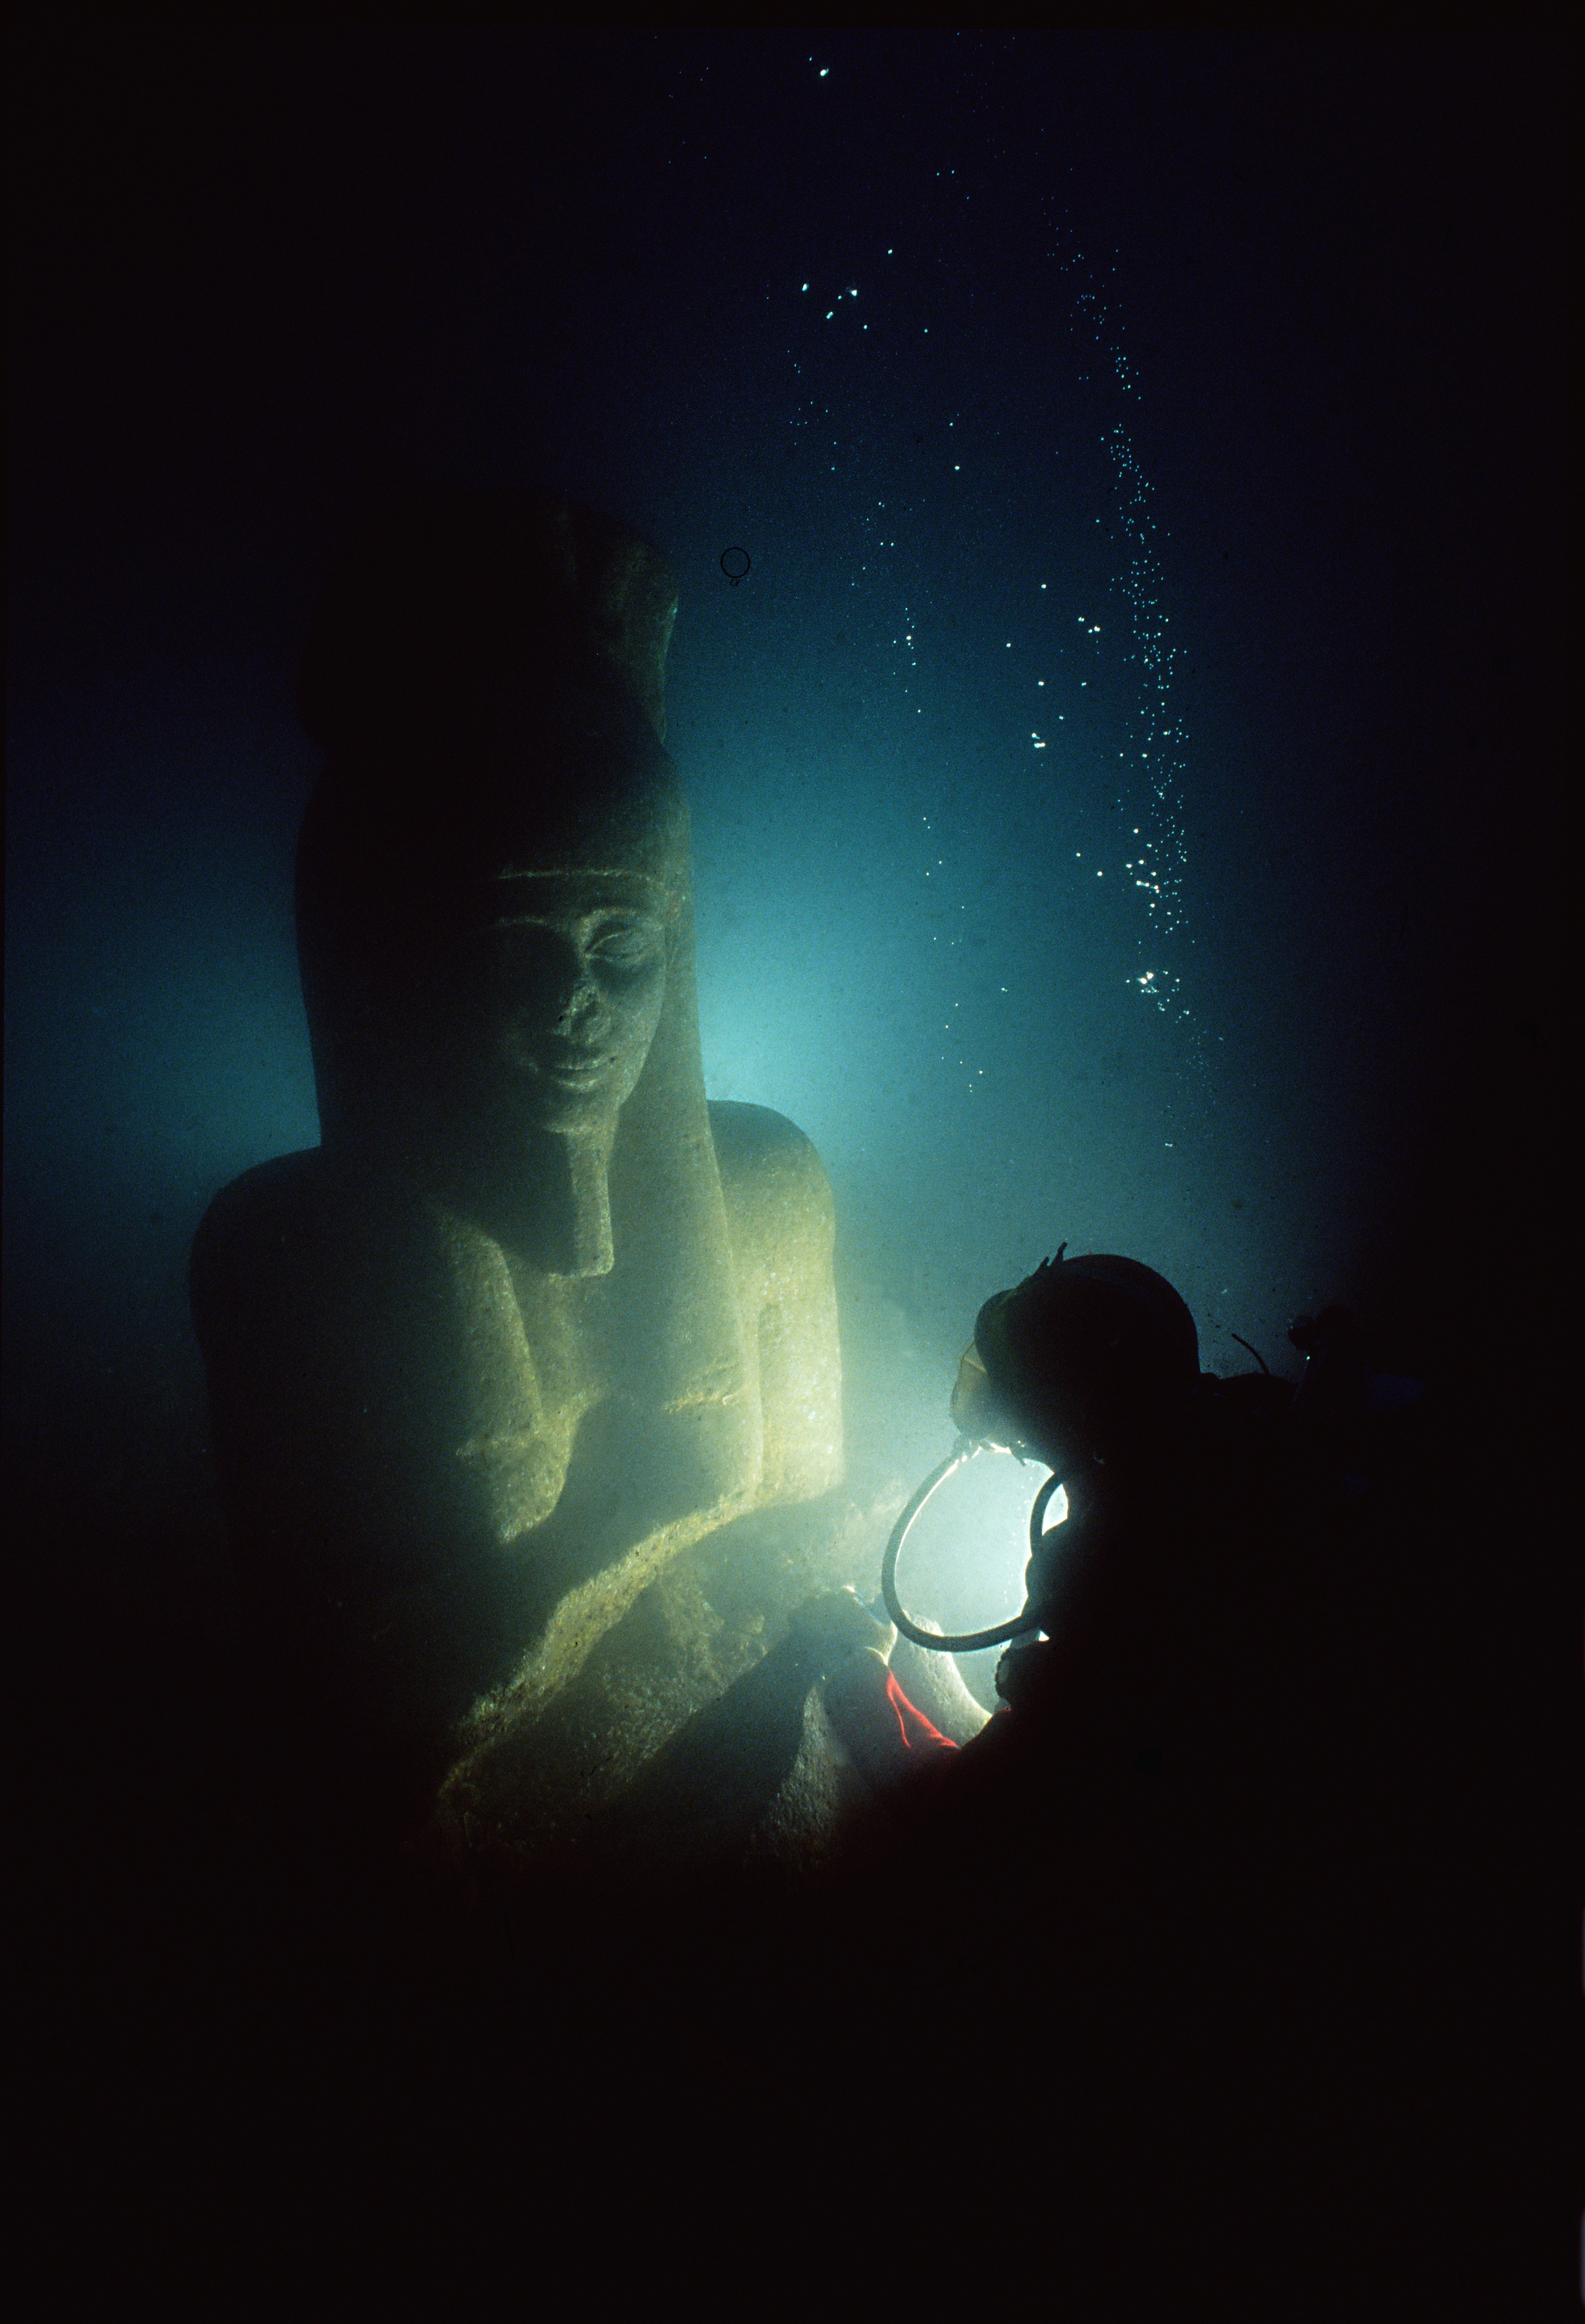   The BP exhibition    Sunken cities: Egypt's lost worlds ,&nbsp; at the British Museum from 19 May - 27 November, was one of the cultural highlights of 2016. The exhibition saw extraordinary objects recovered from beneath the seabed of Egypt's Abuki